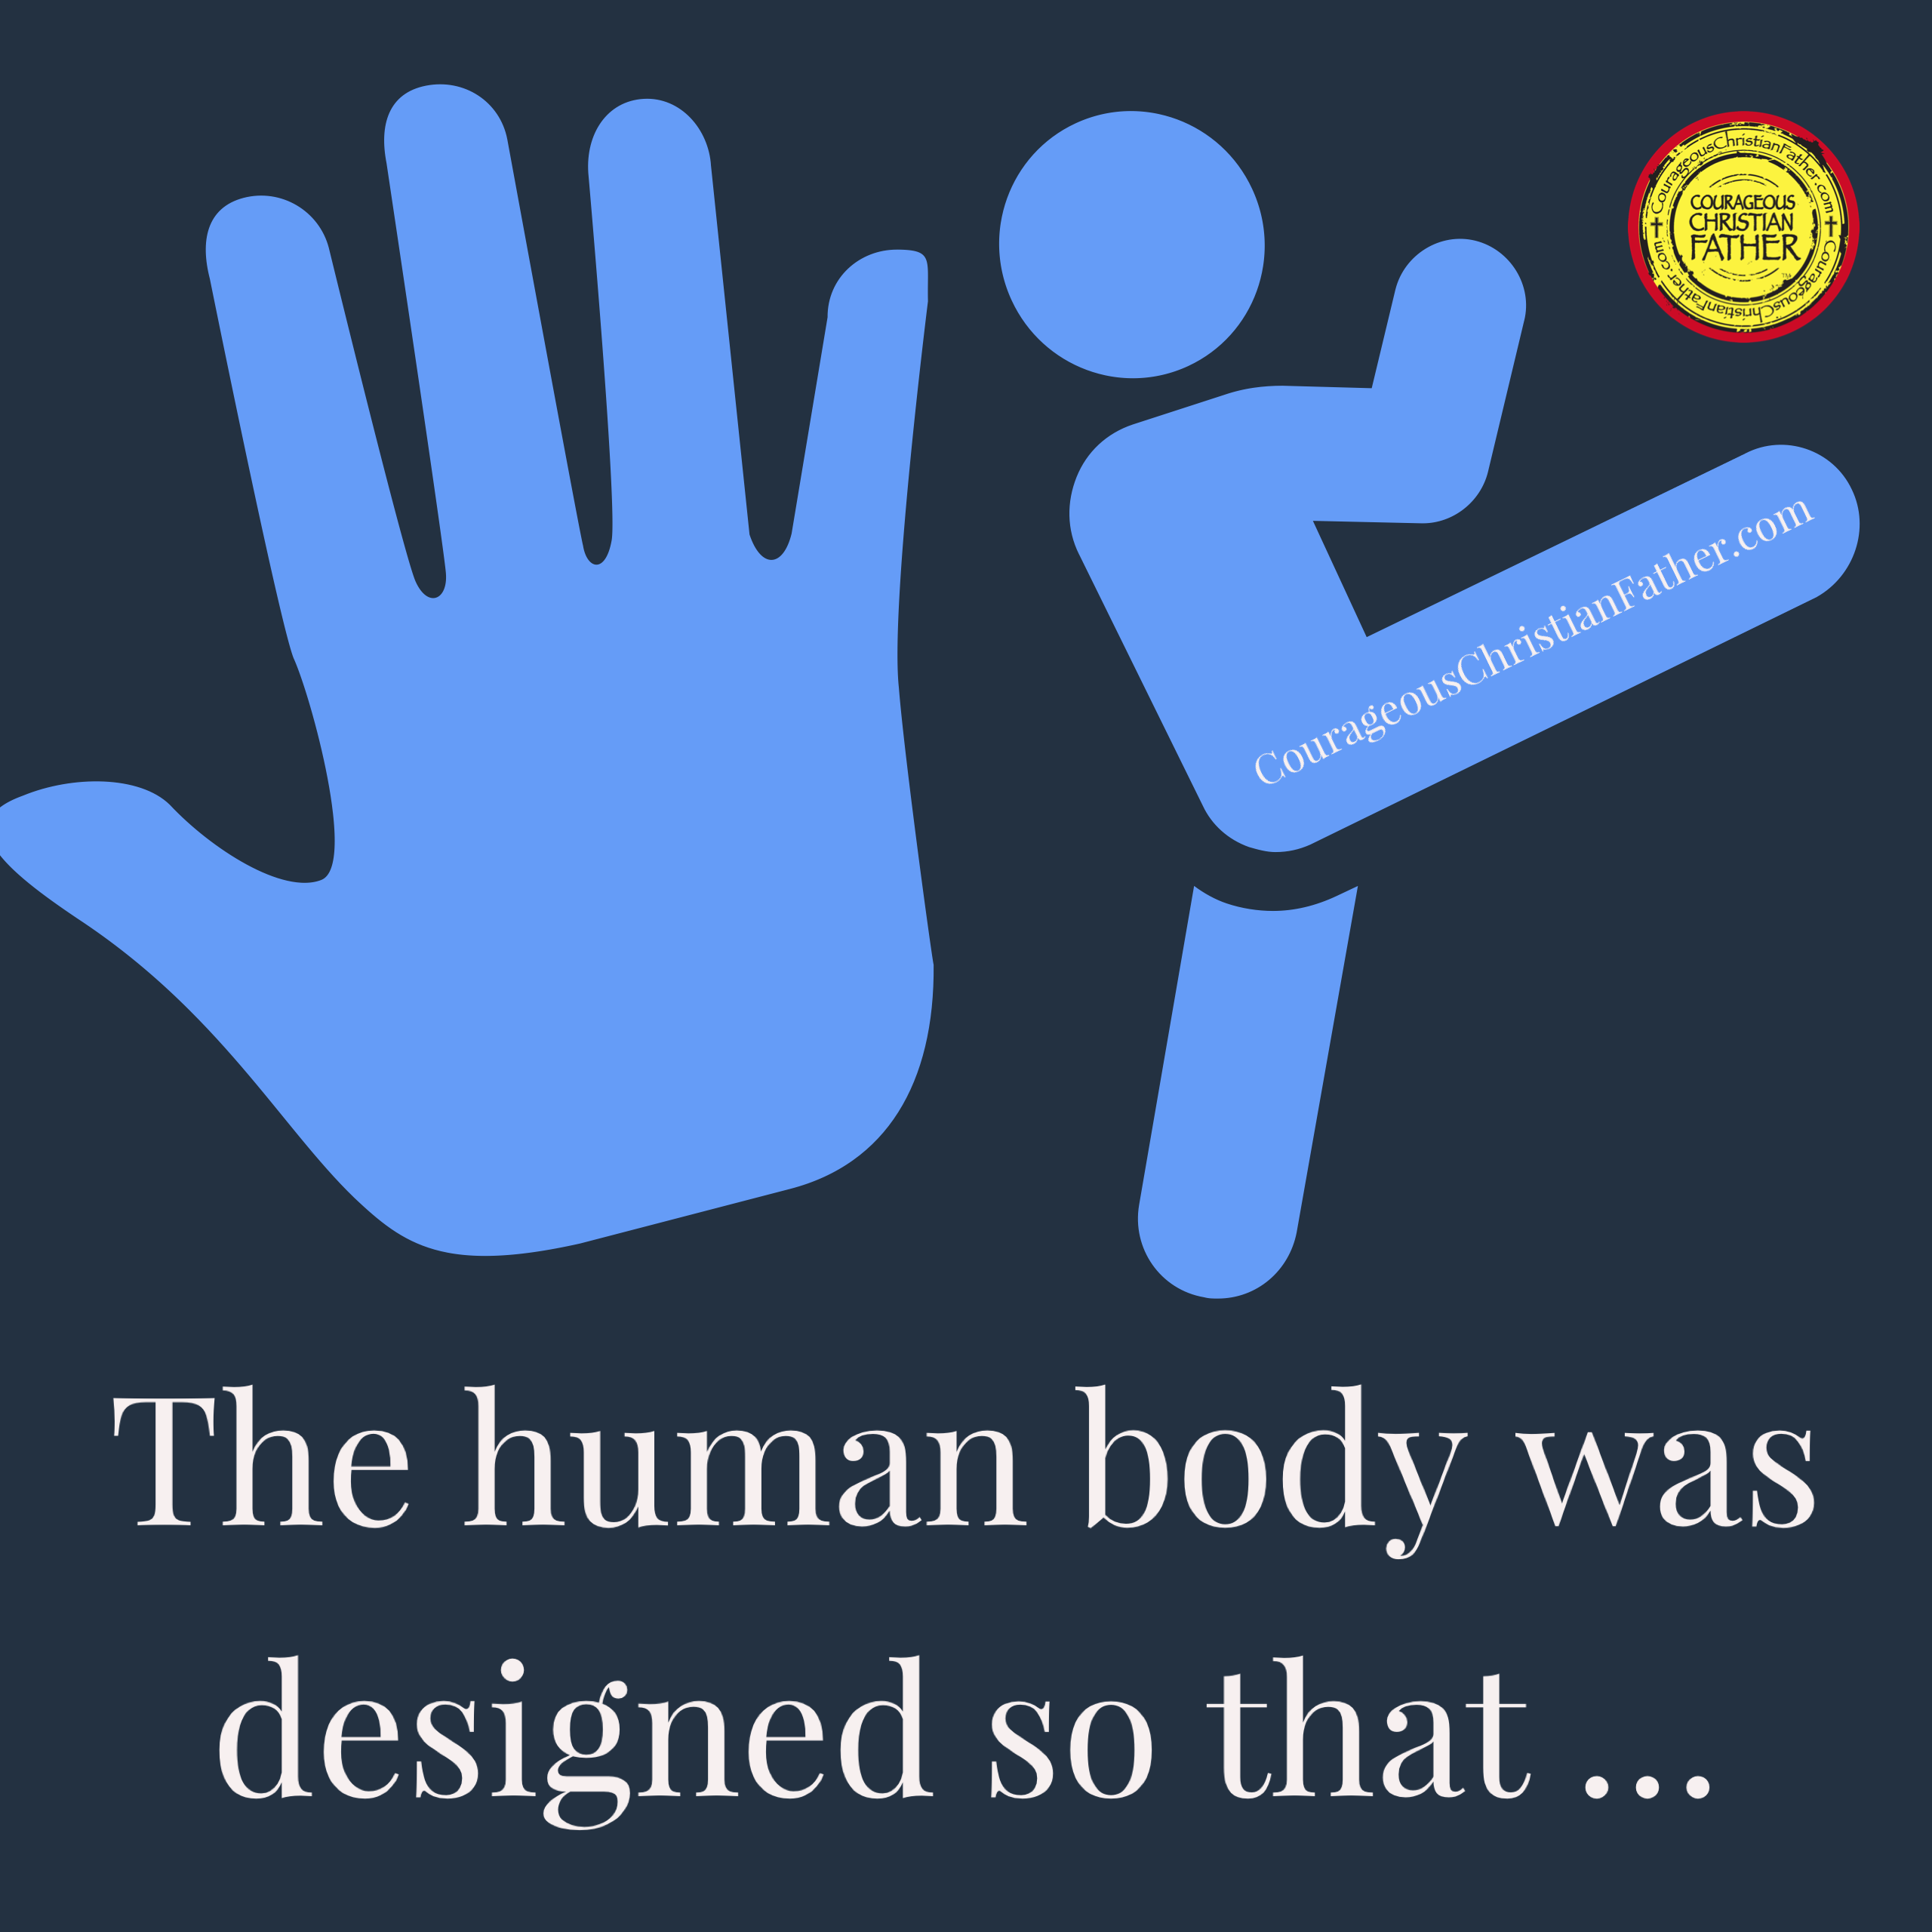 The human body was designed so that we can neither pat our own backs nor kick ourselves too easily.